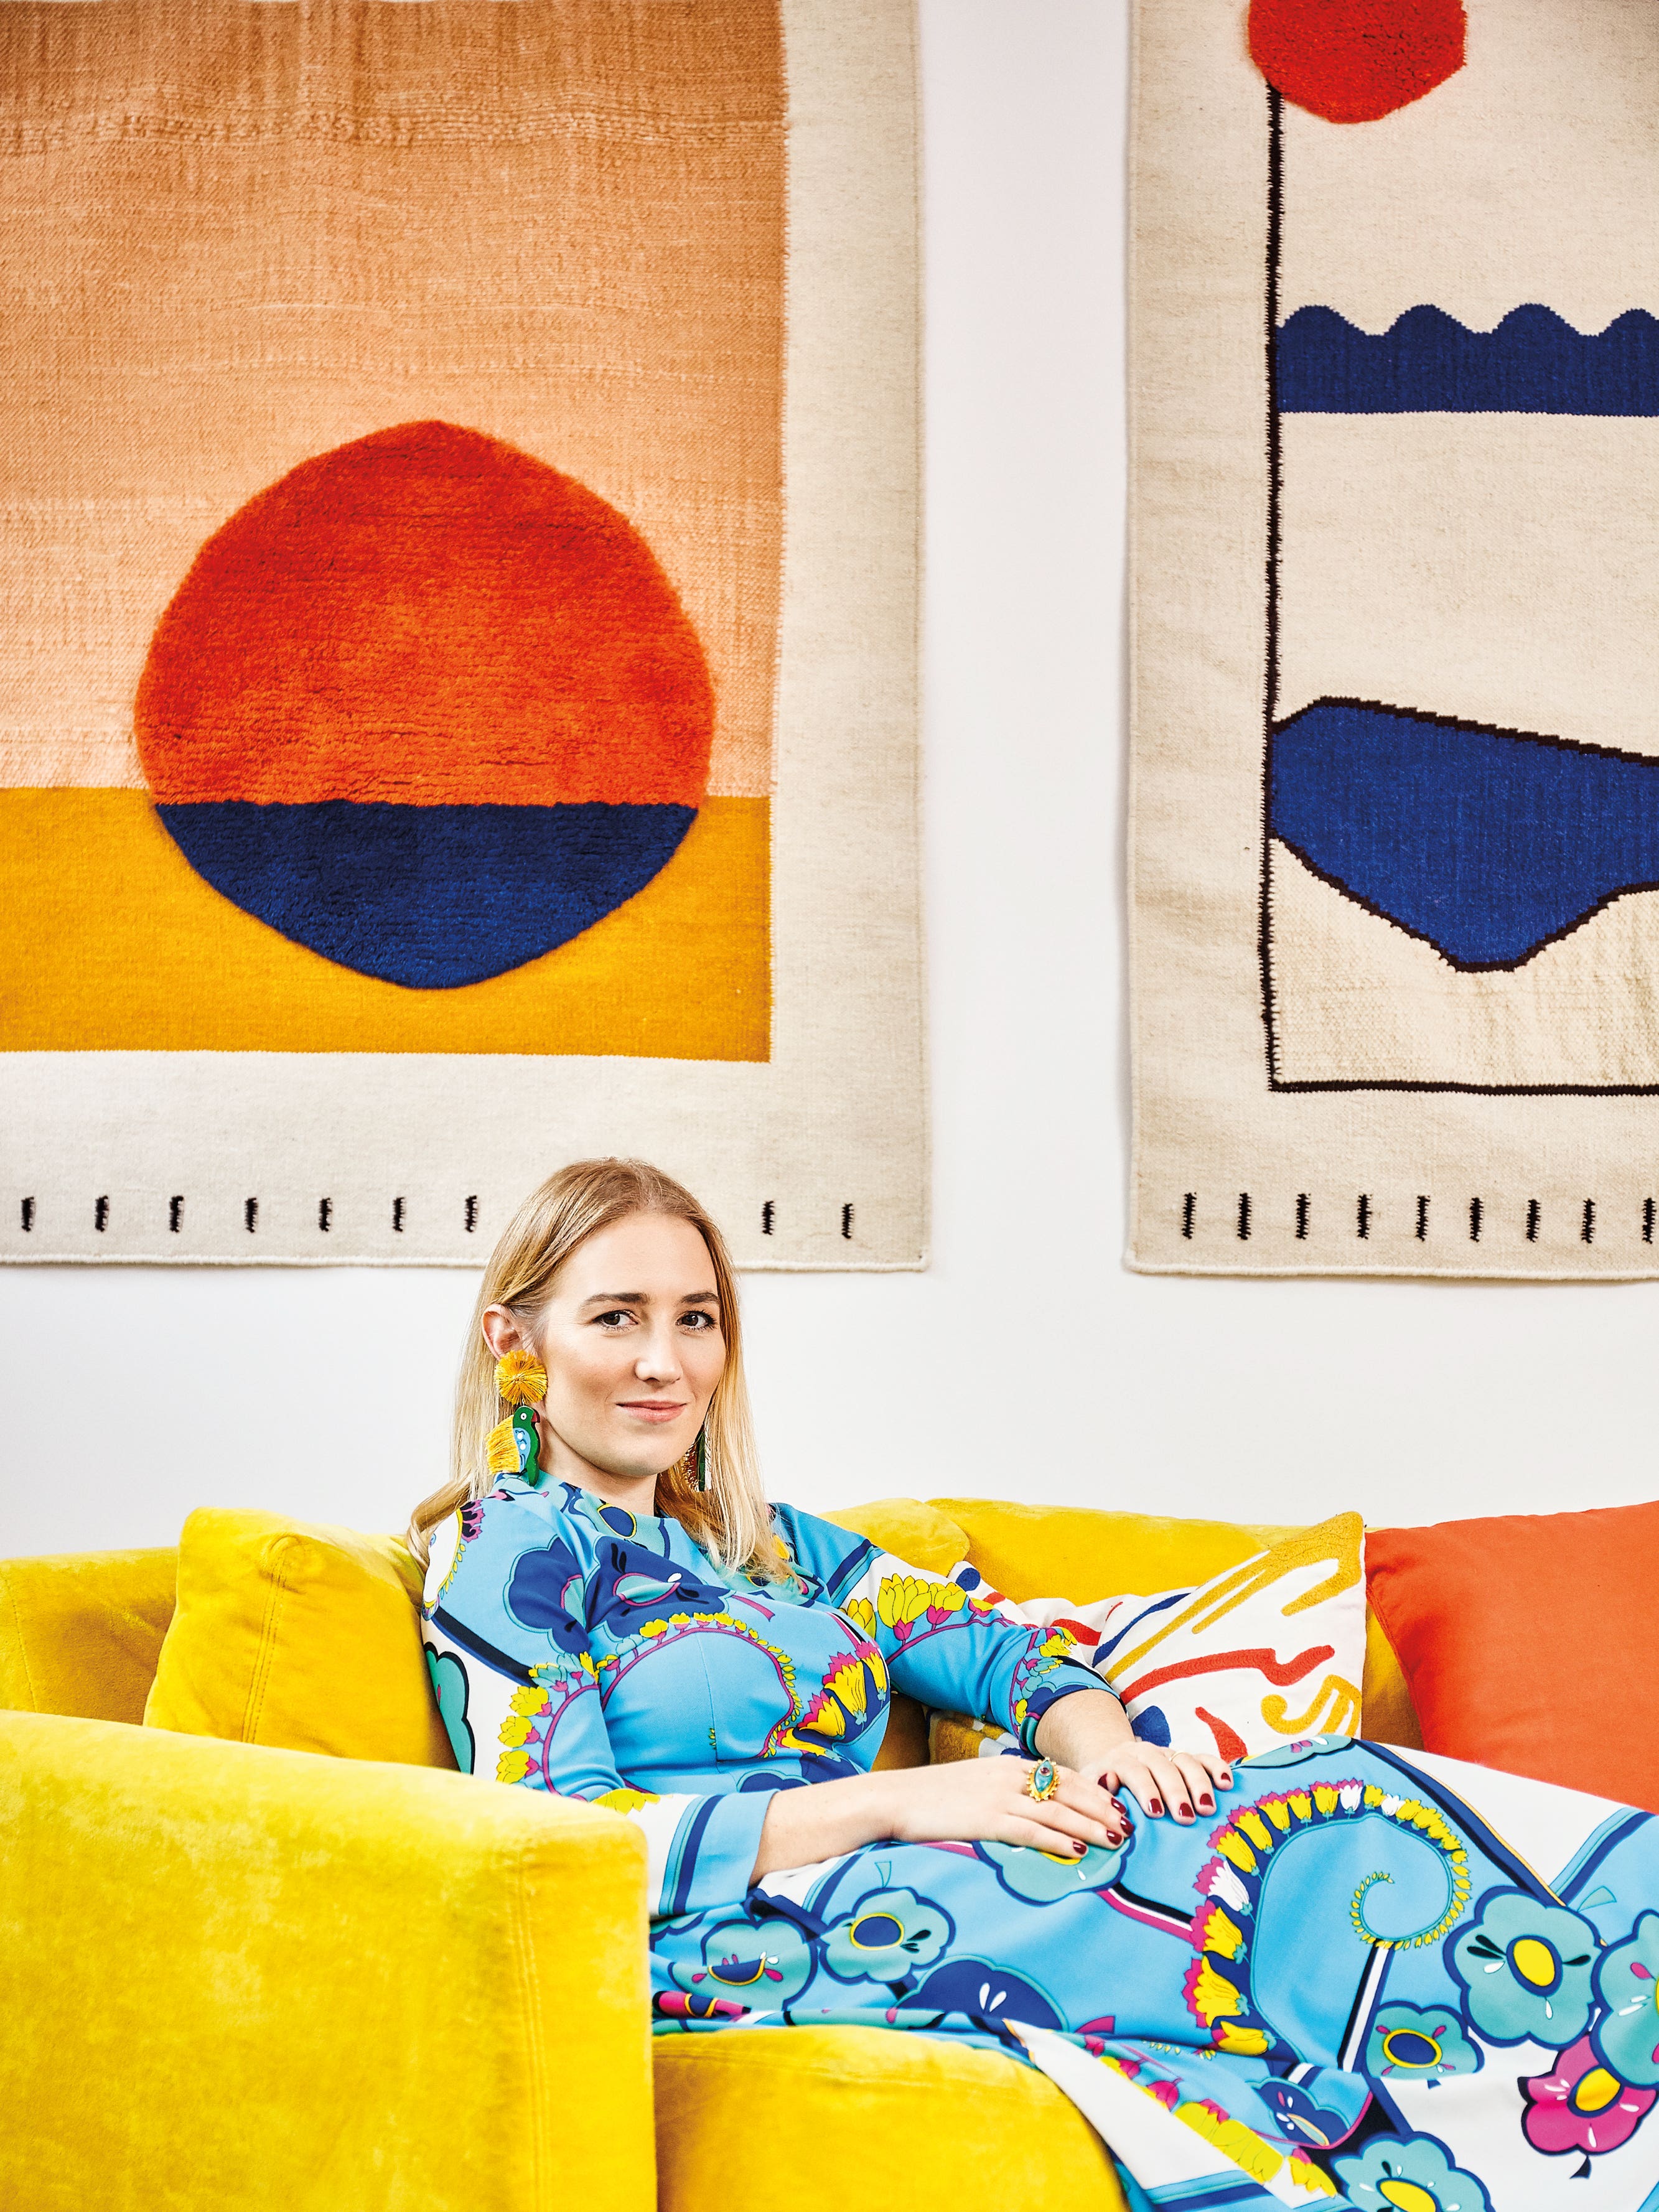 The Founder of Aelfie Invites Us Inside Her Color-Saturated Long Island Home